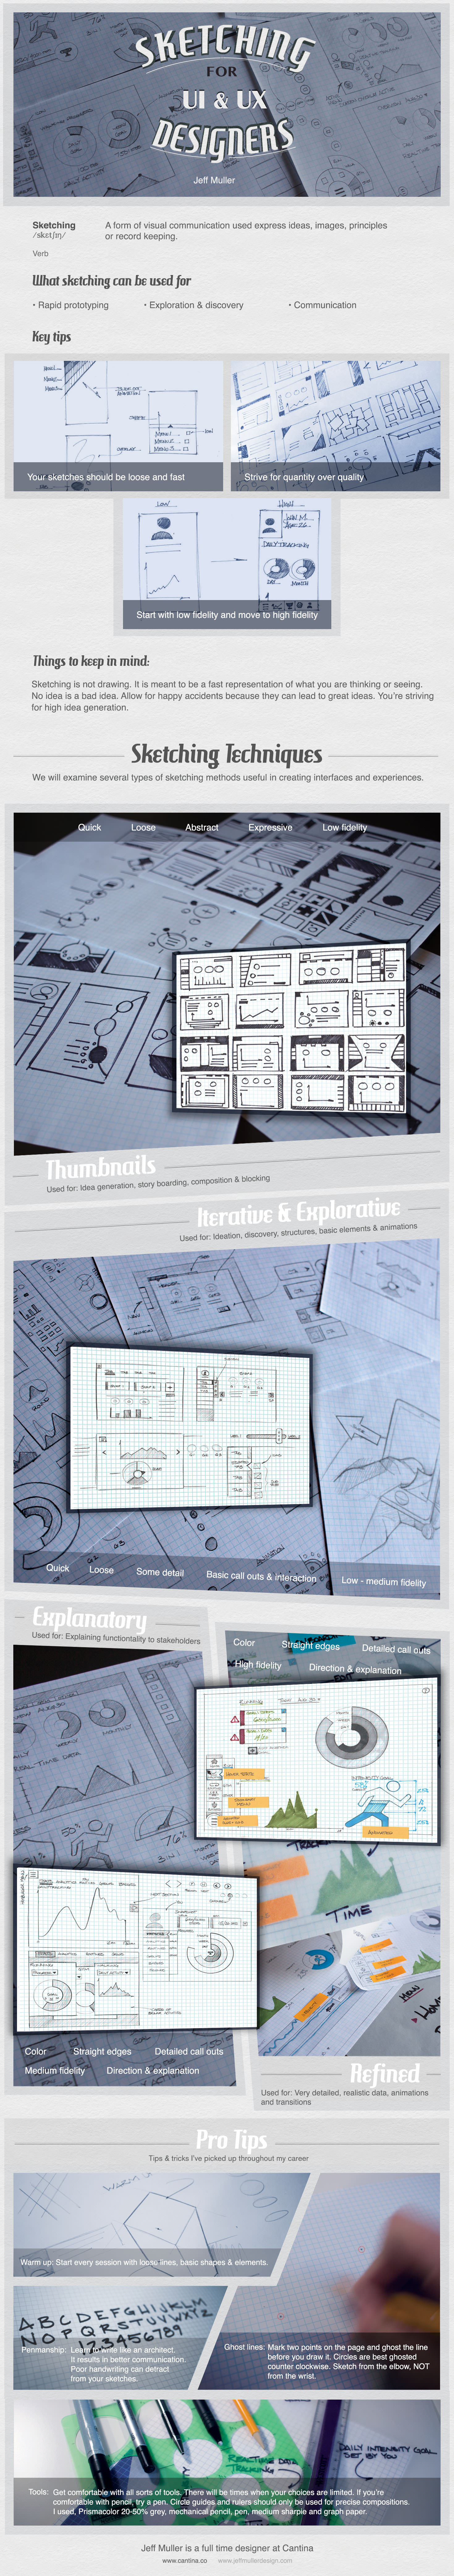 infographic-sketching-for-ux-designers